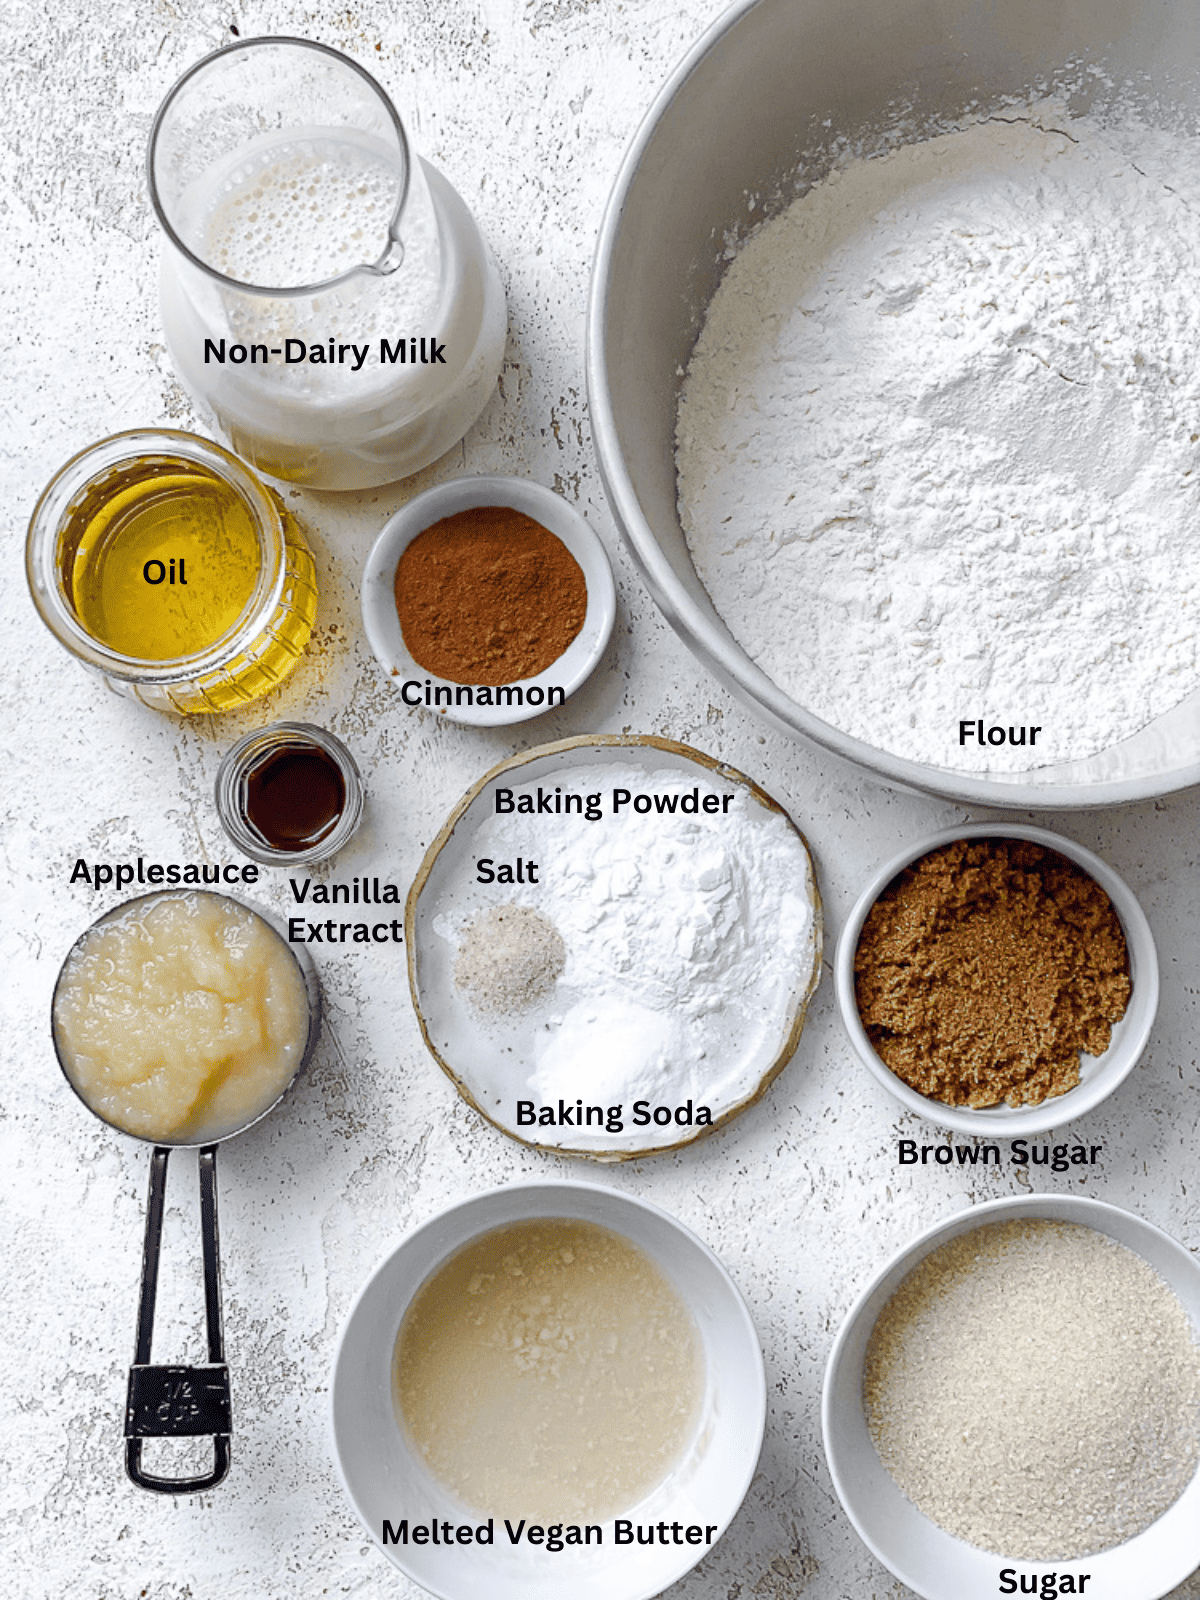 ingredients for Vegan Coffee Cake measured out against a white surface